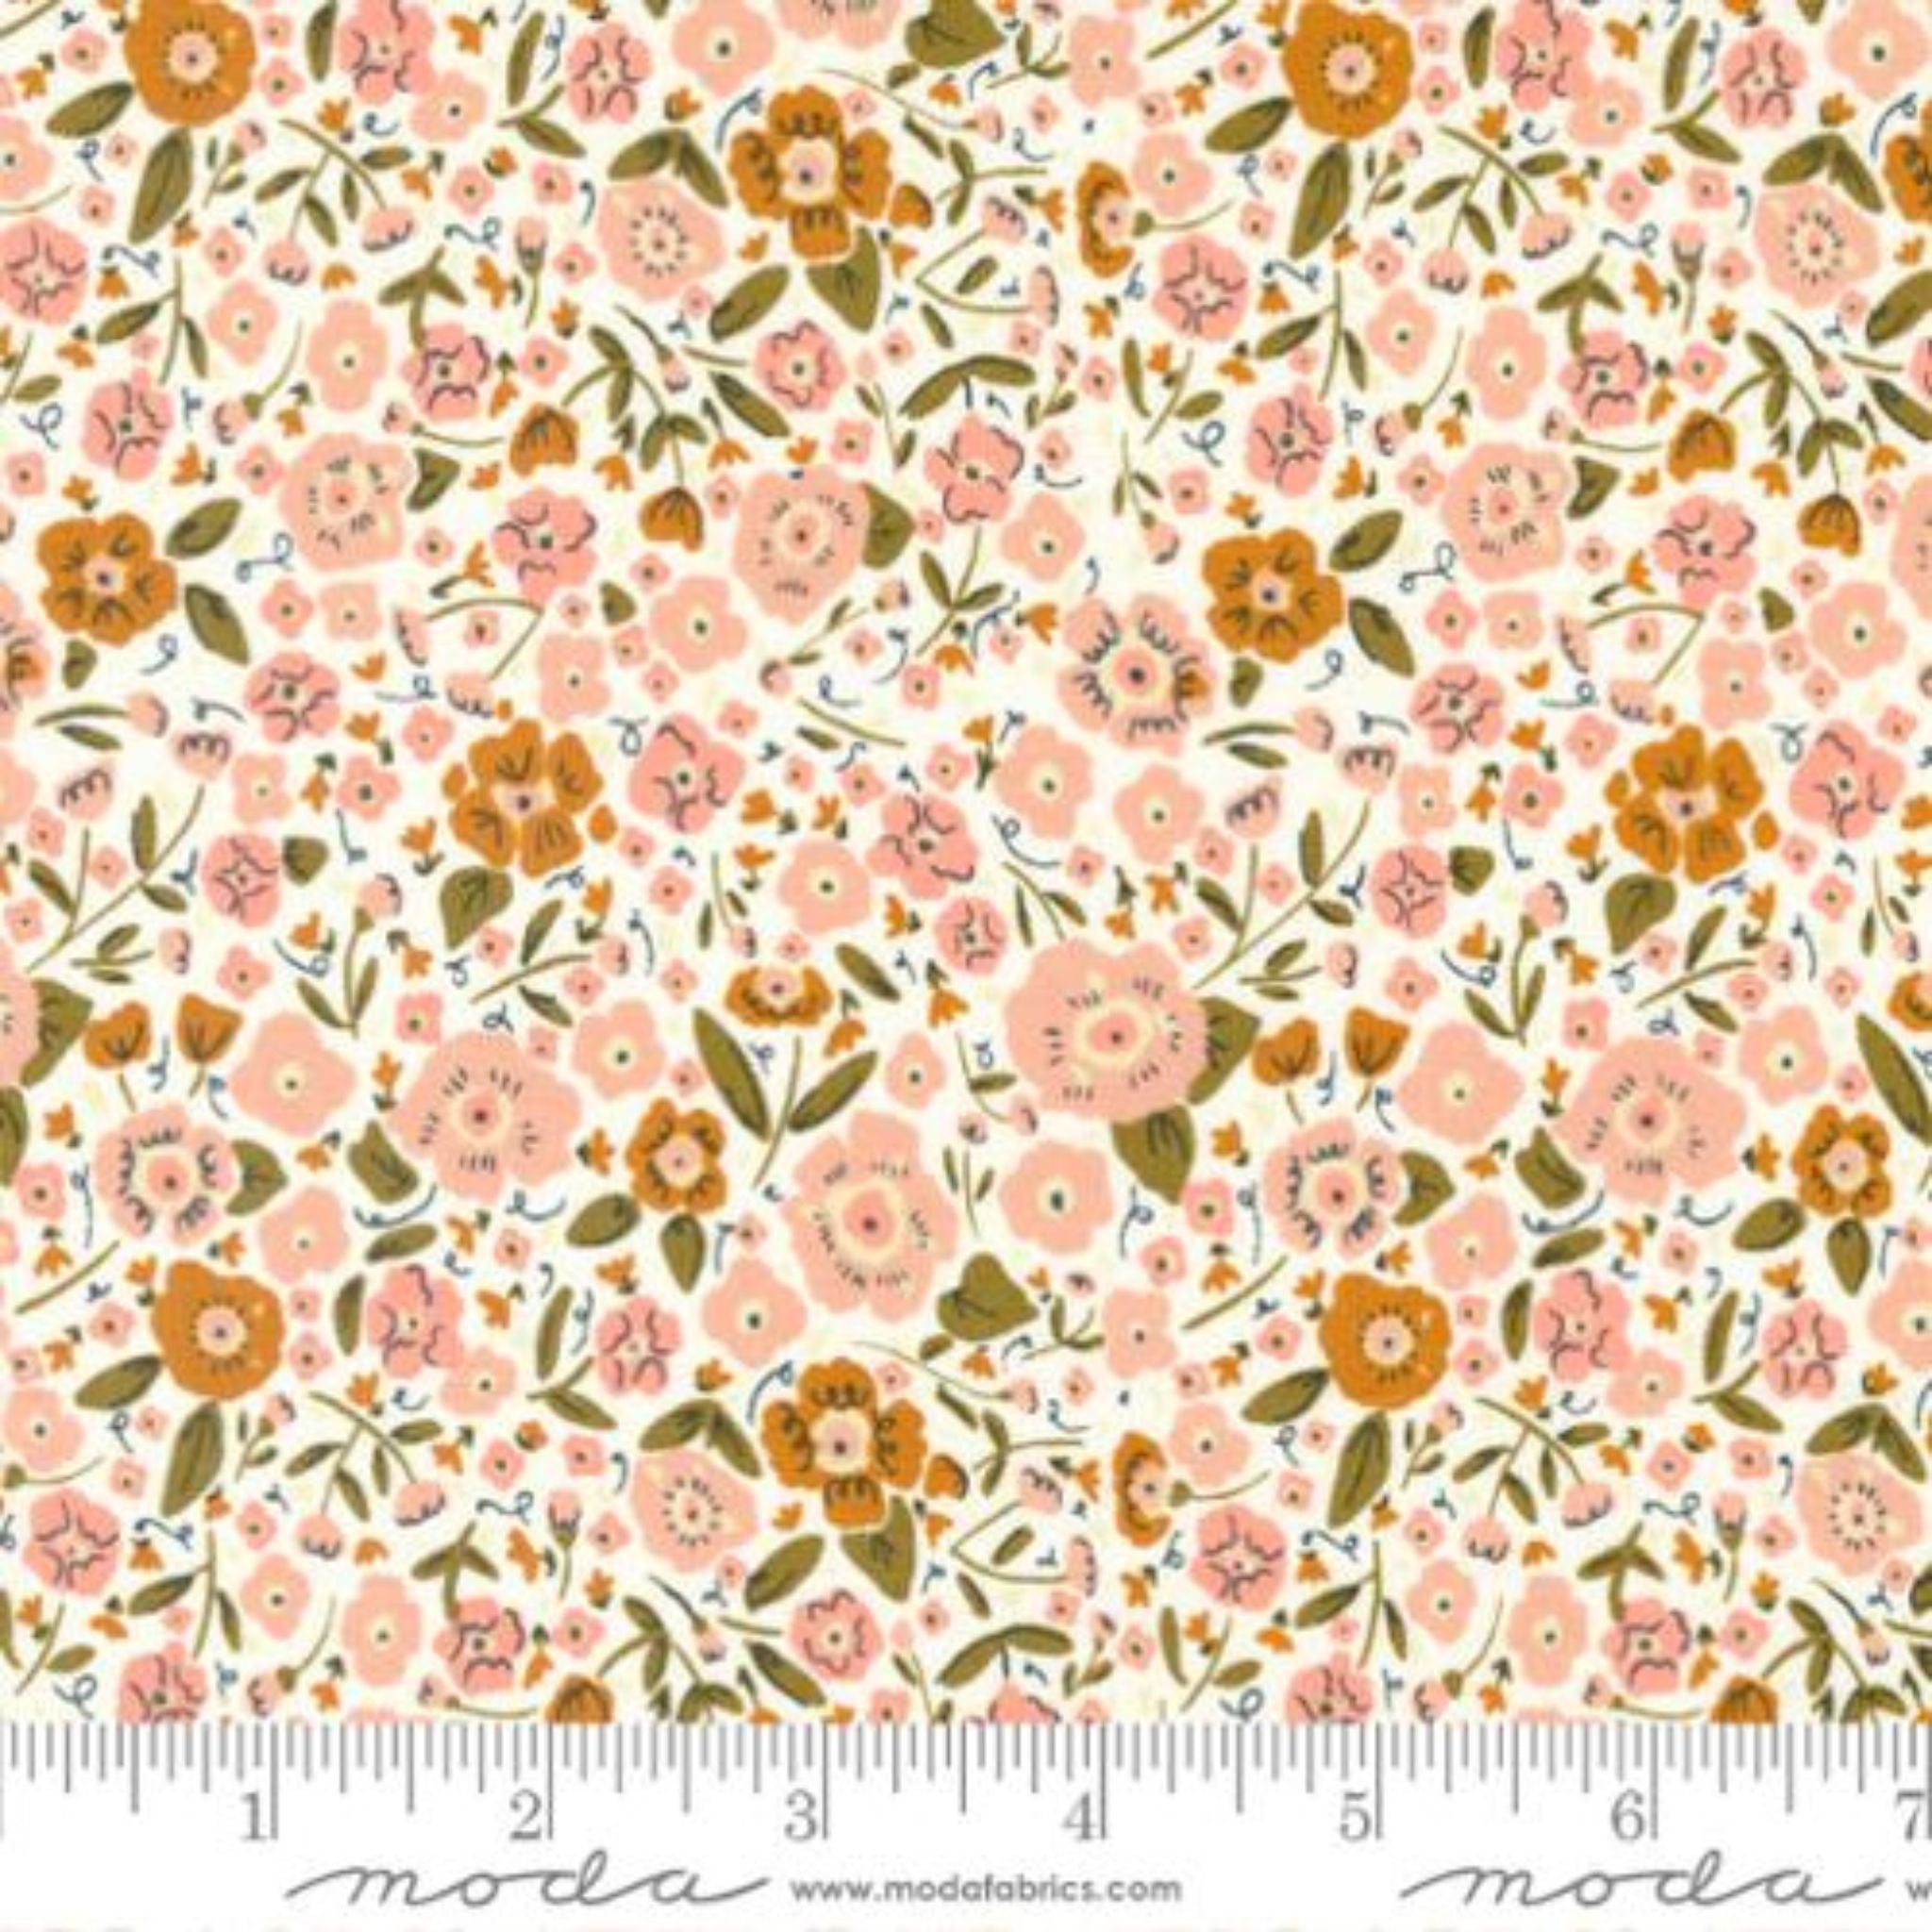 Muted pink and brown flowers on cream - Quaint Cottage by Moda